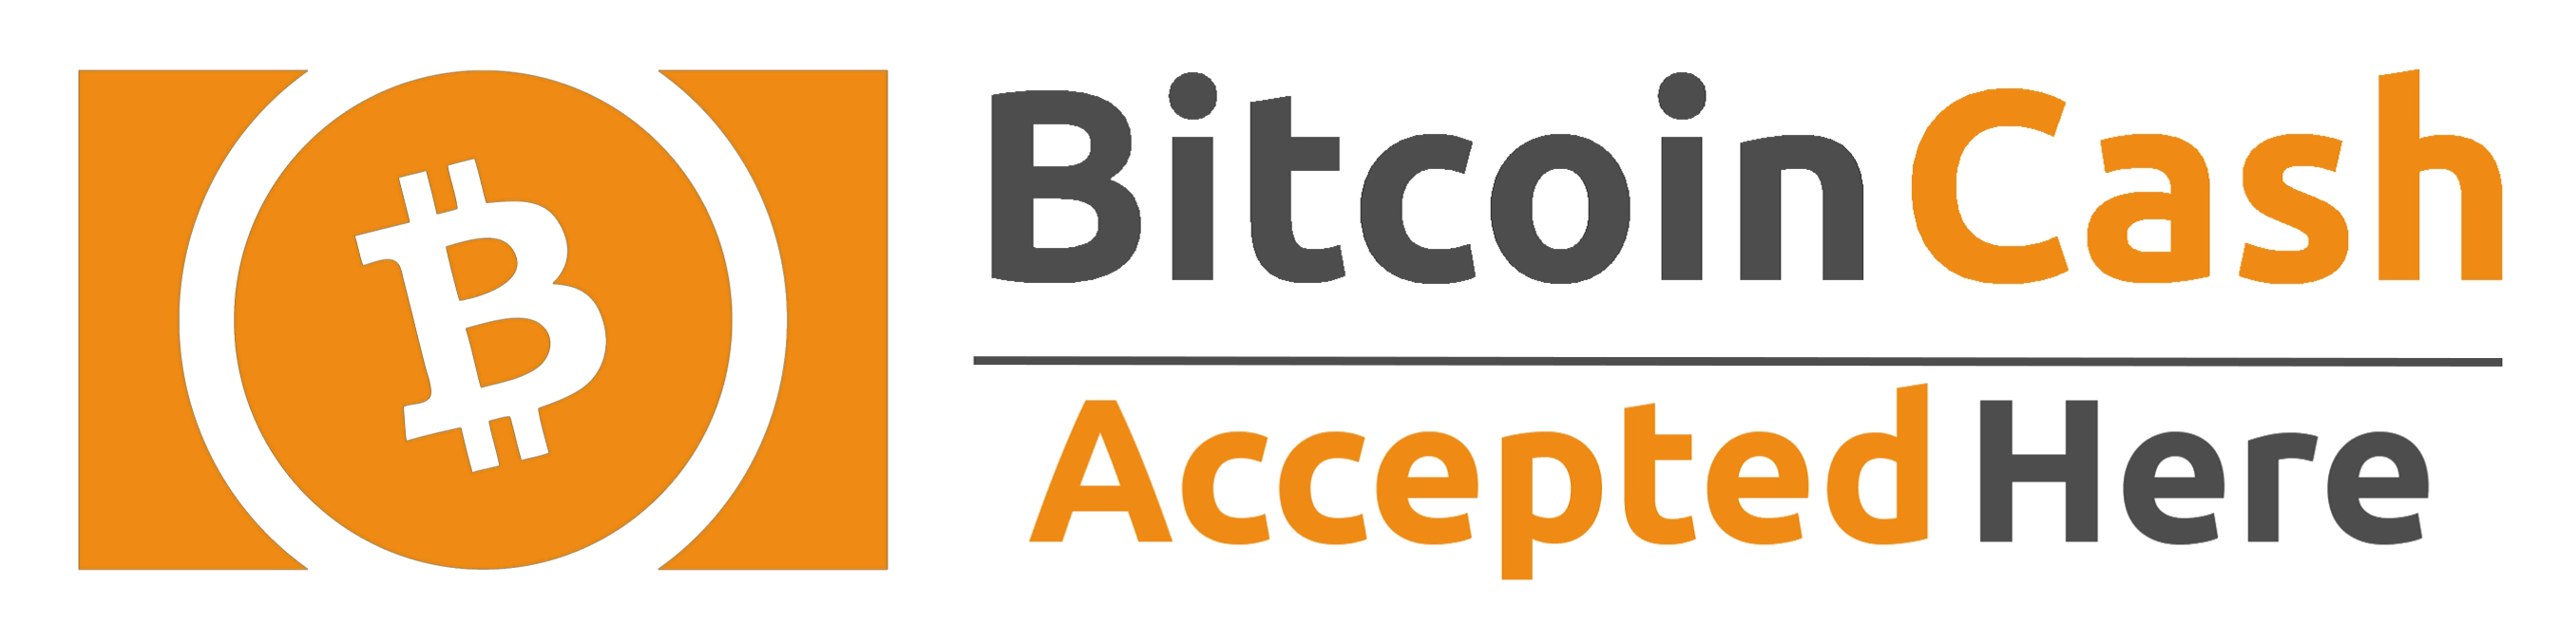 Cash Accepted Logo - I created a new BitcoinCash 'Accepted Here' graphic - feel free to ...